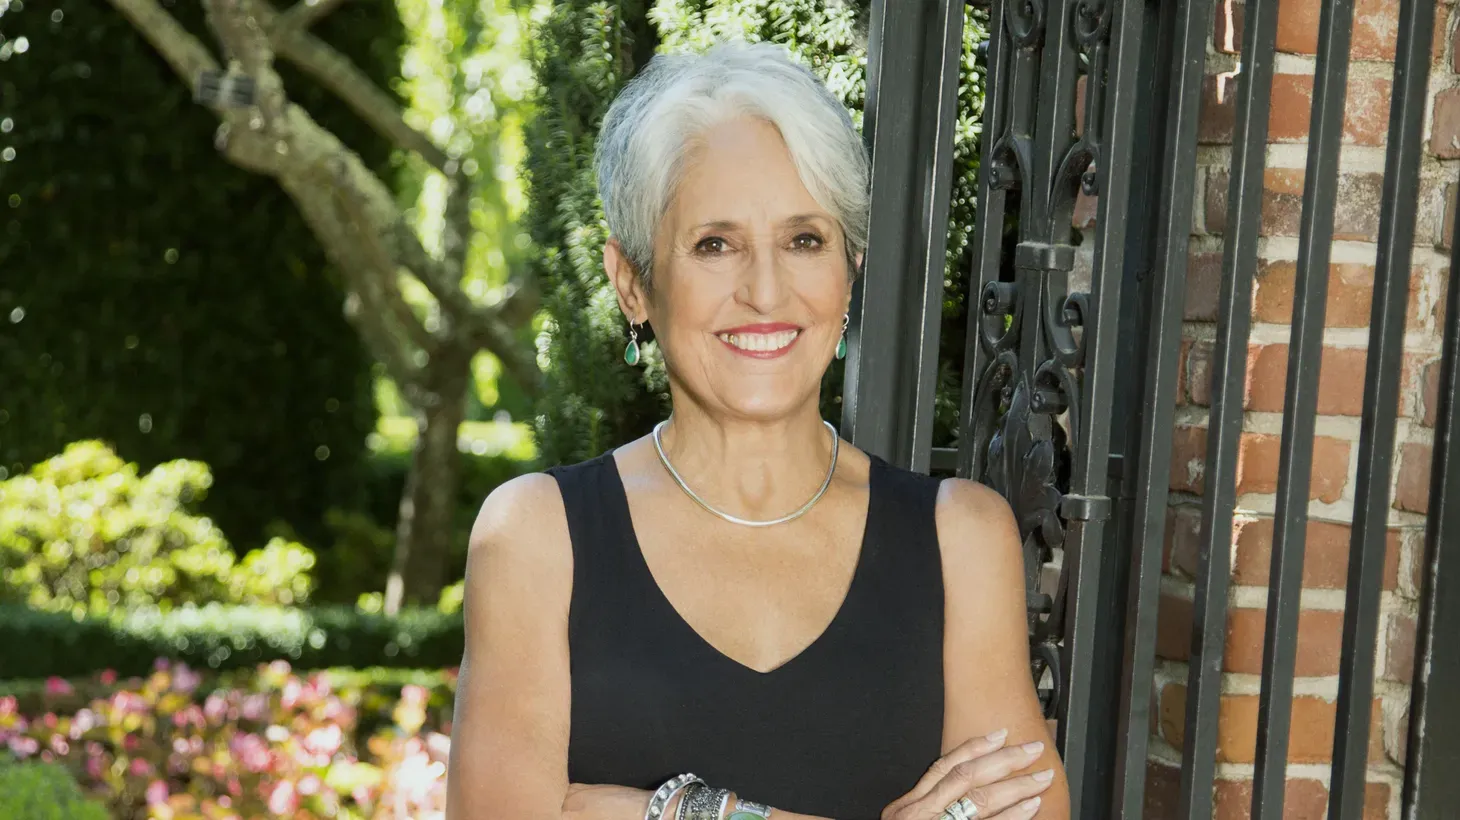 After Joan Baez retired from music touring in 2019, she turned to painting, drawing, and publishing books.